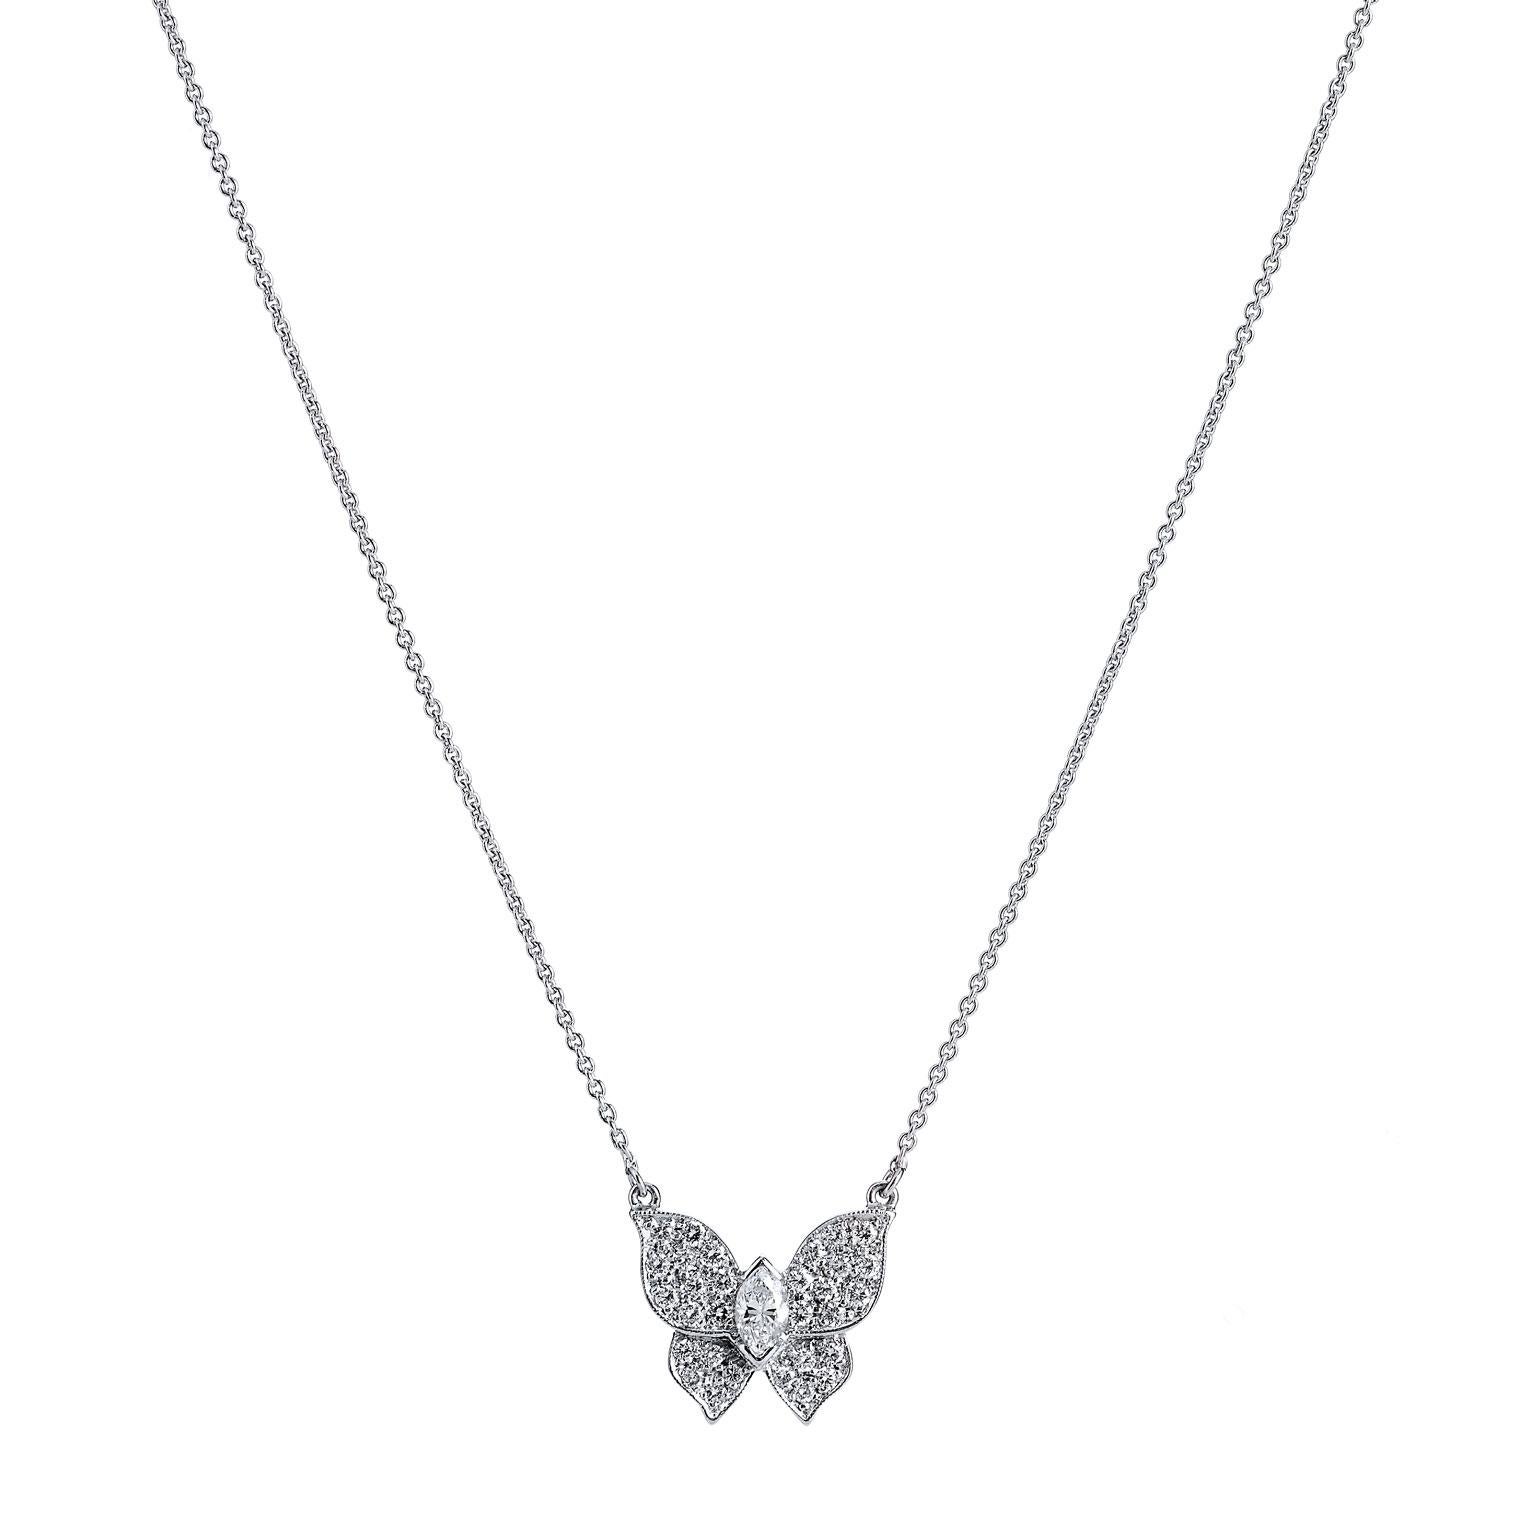 0.54 carat of diamond light shimmers with the movement of a flutter in this handmade H and H butterfly pendant fashioned in 18 karat white gold. This piece features a 0.21 carat prong-set marquis cut diamond at center (H/SI2) accompanied by thirty